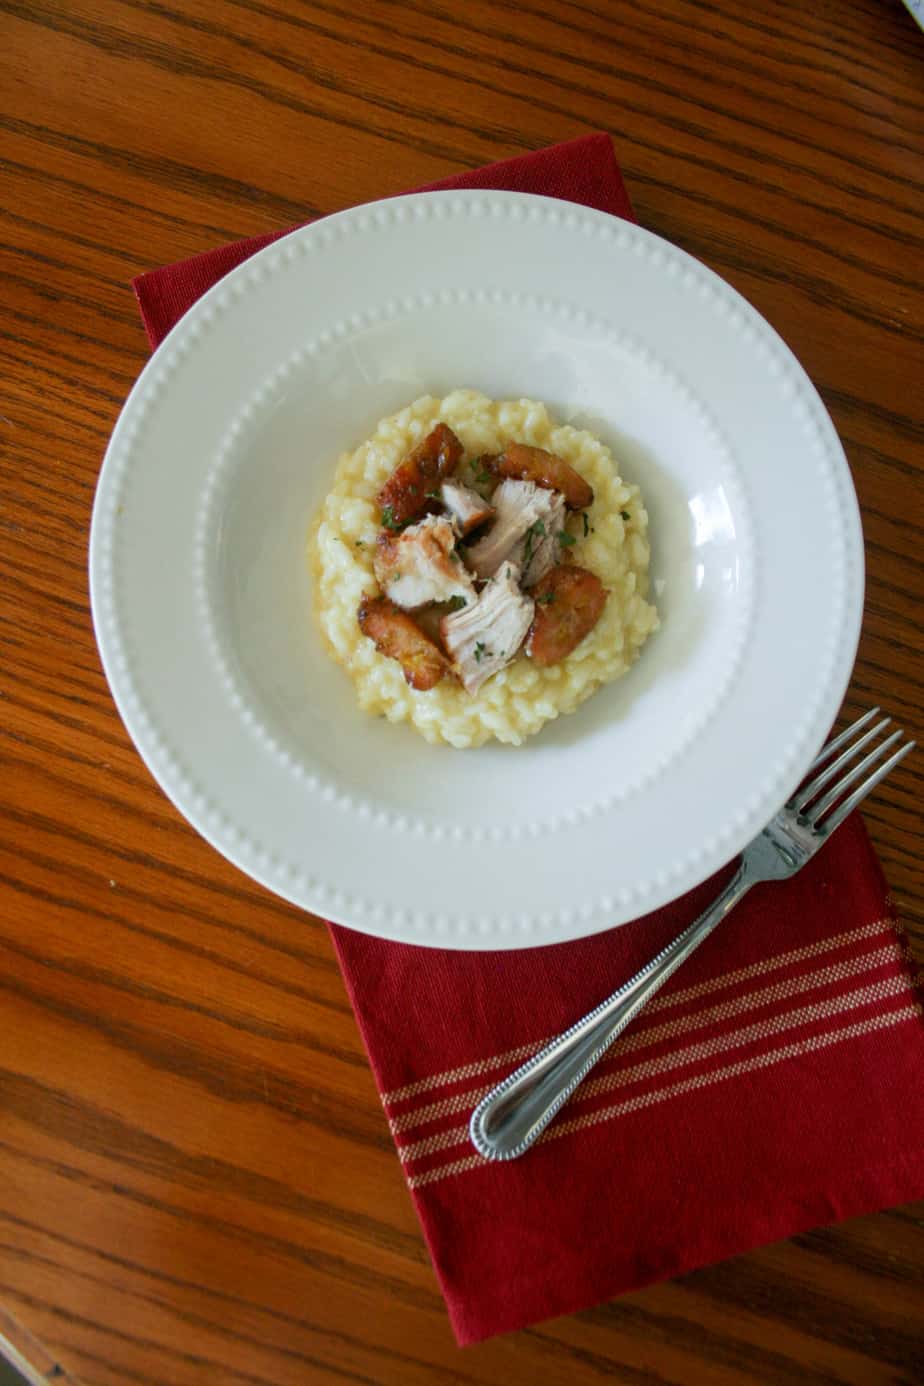 Parmesan Garlic Risotto topped with pork chunks and sweet plantains is the perfect dinner with a Hispanic twist!